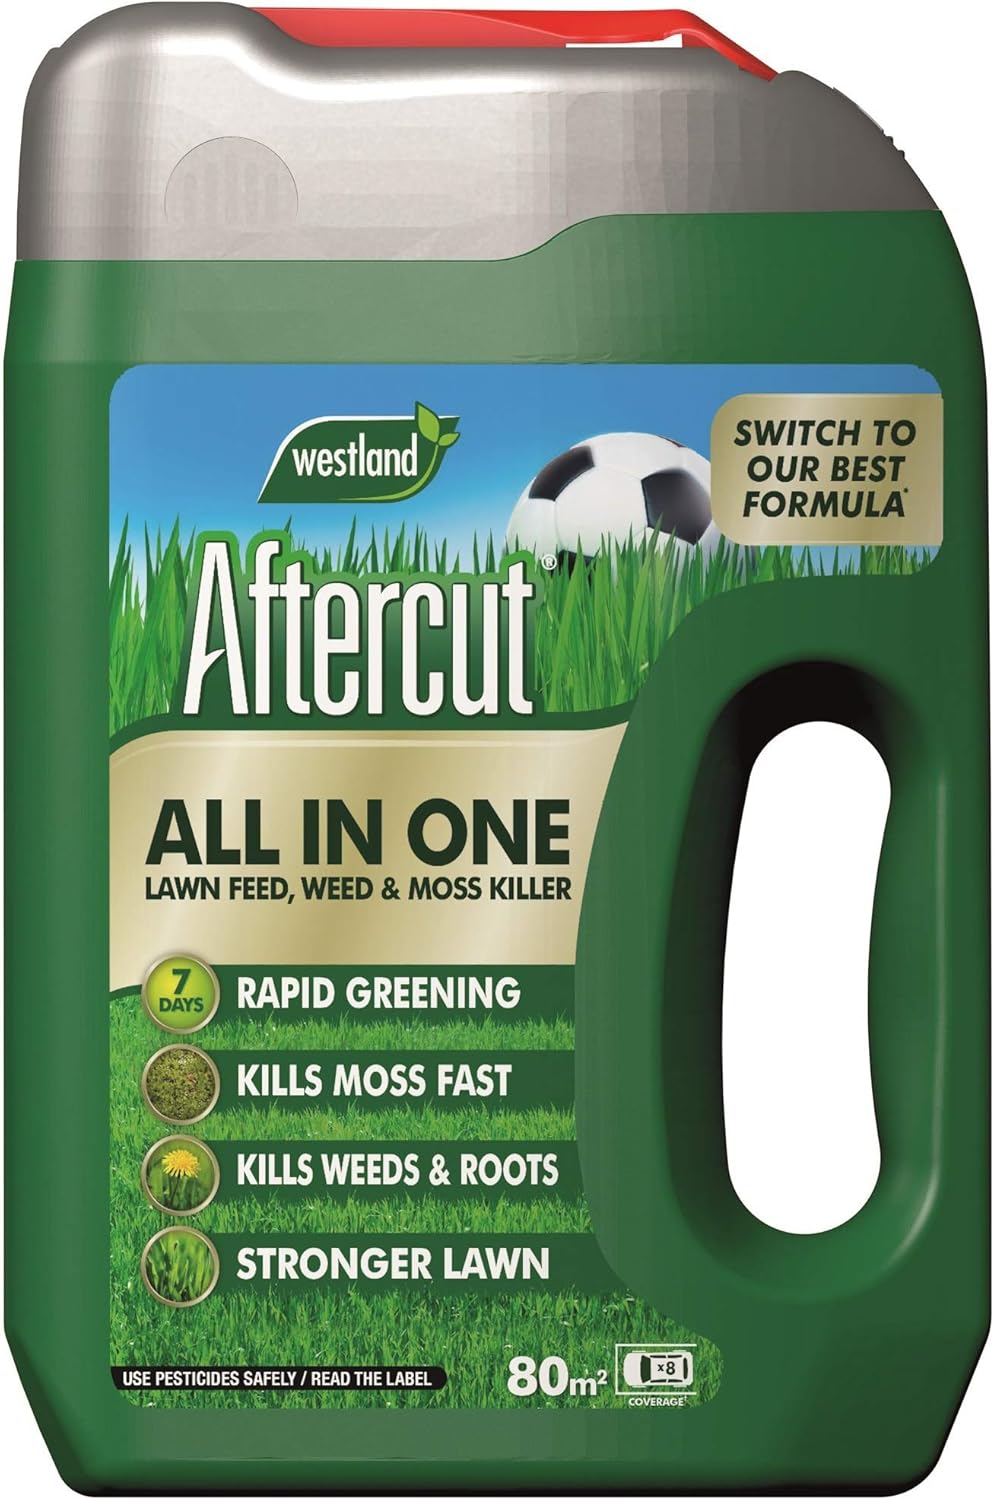 Aftercut 20400459 All In One Lawn Feed, Weed and Moss Killer Even-Flo Spreader, 80 m2, 2.56 kg, Natural?20400459